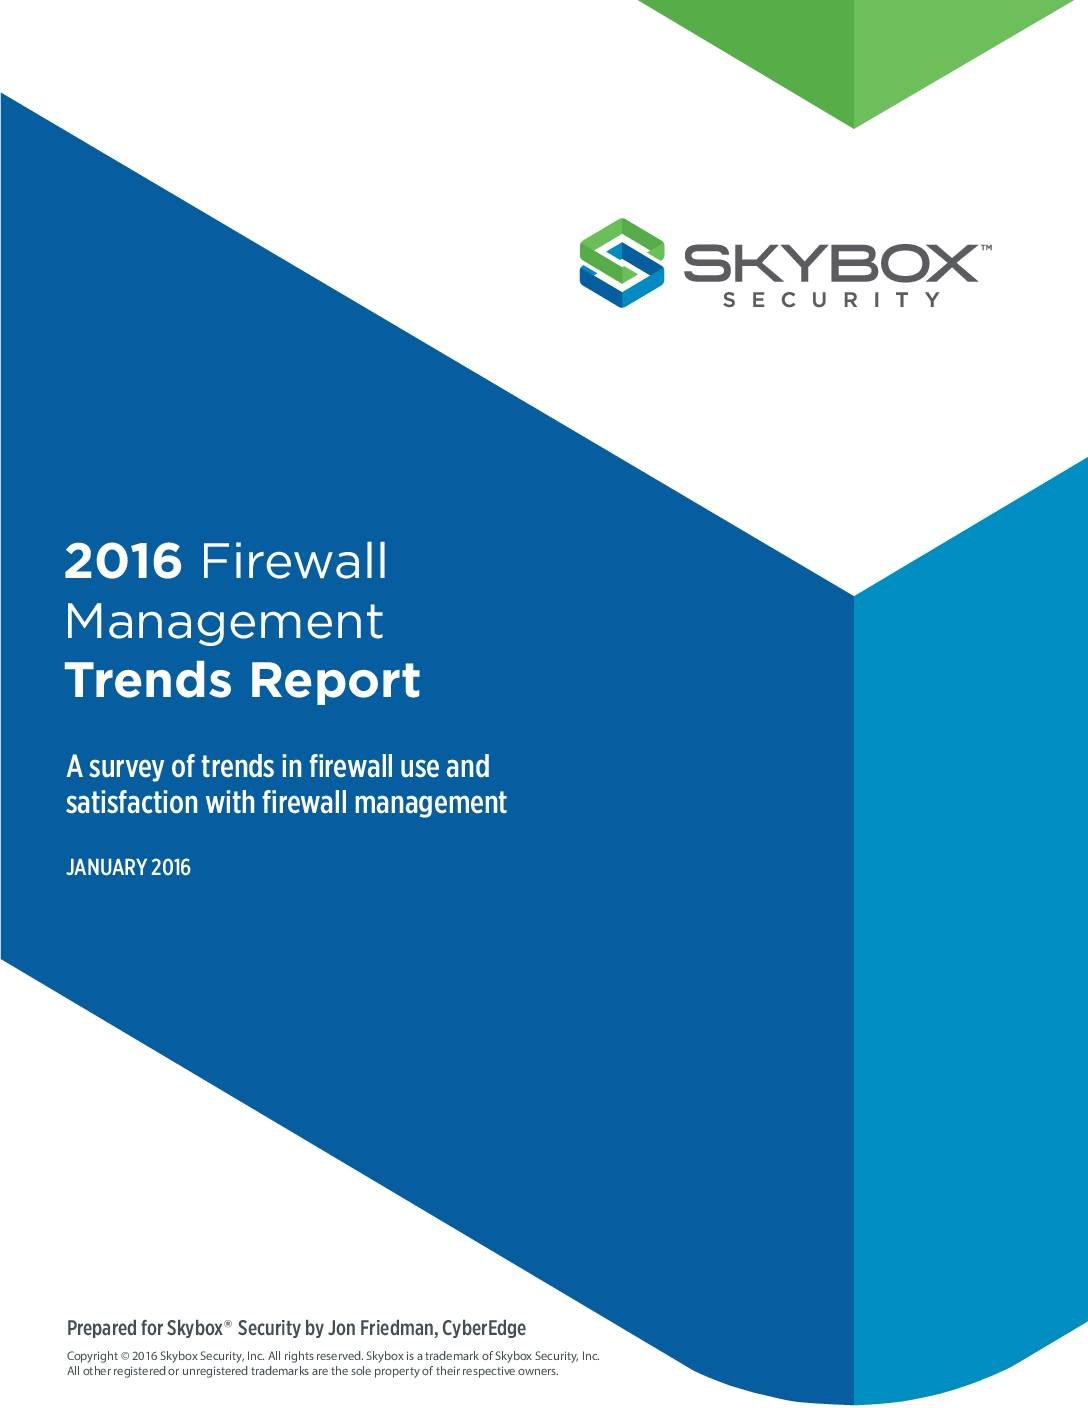 Featured image for 2016 Firewall Management Trends Report